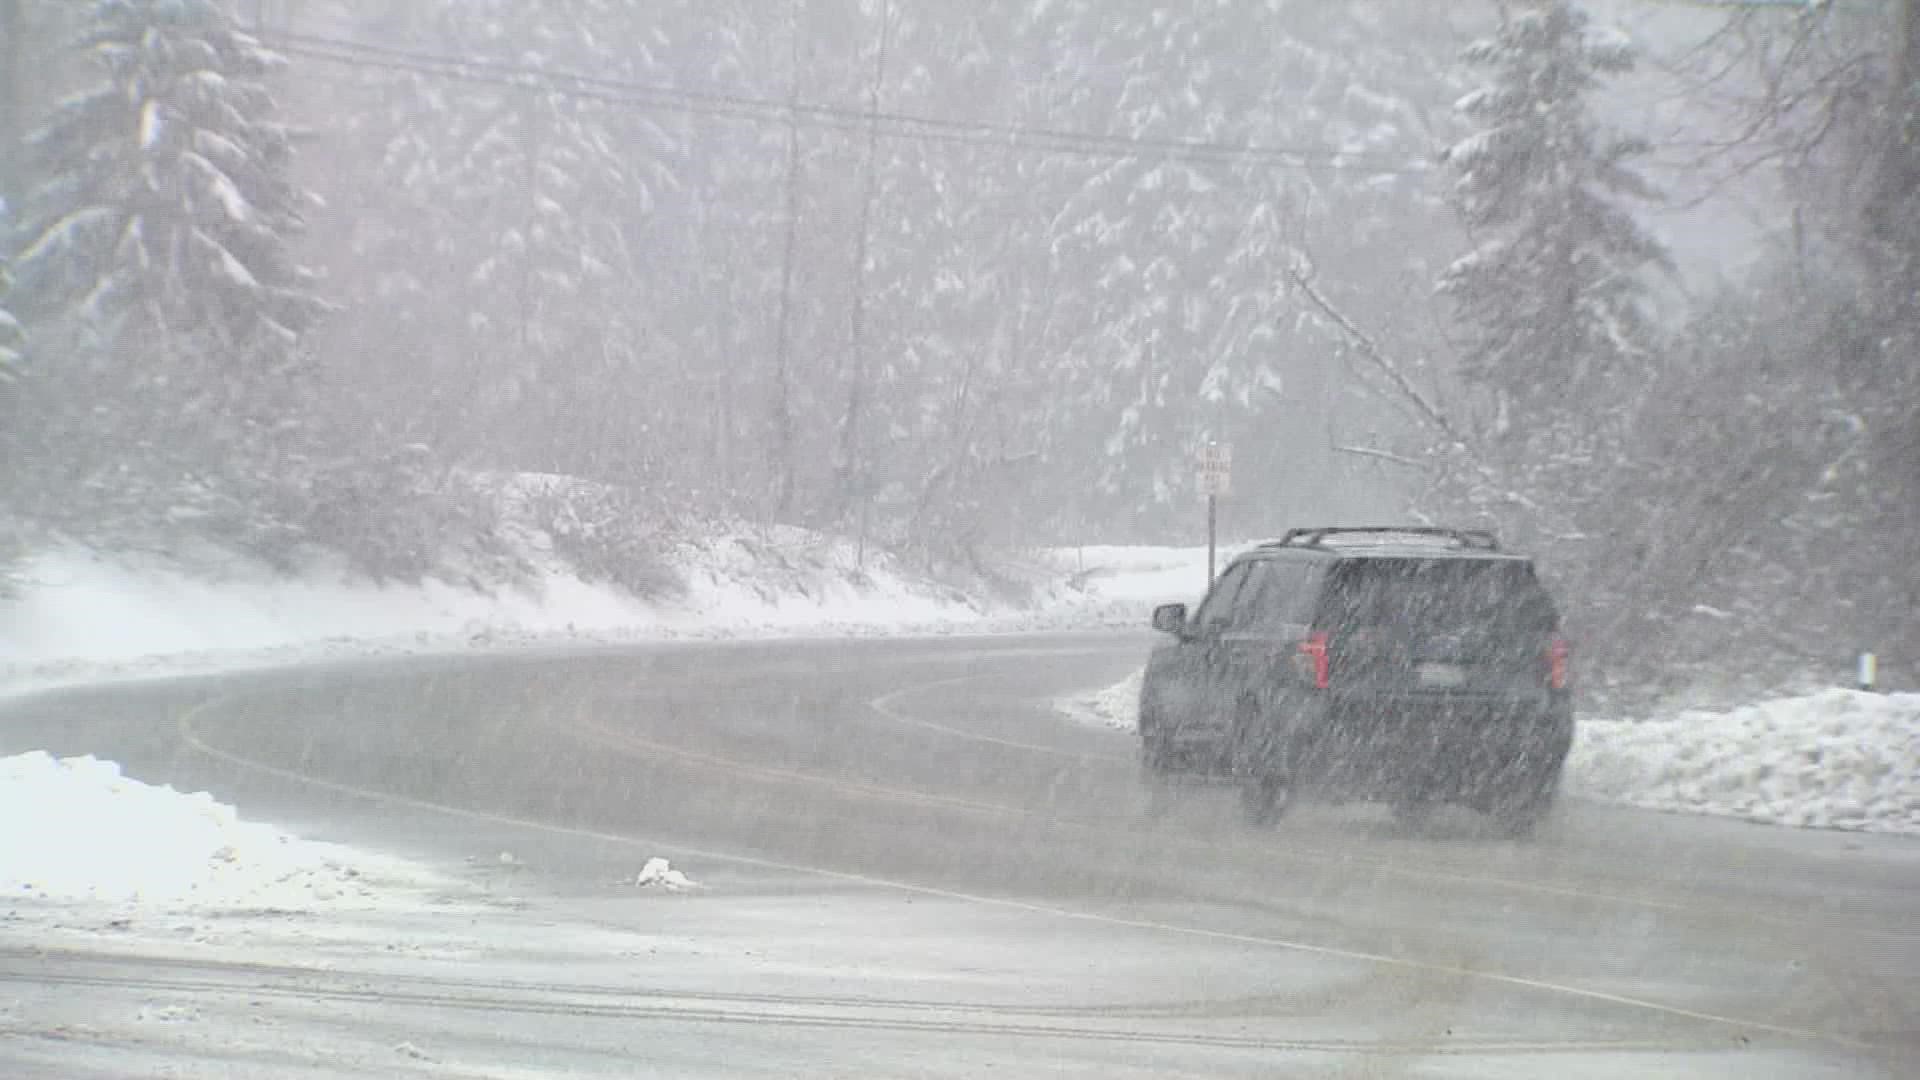 Snoqualmie Pass has already closed this week due to severe weather conditions and spinouts.